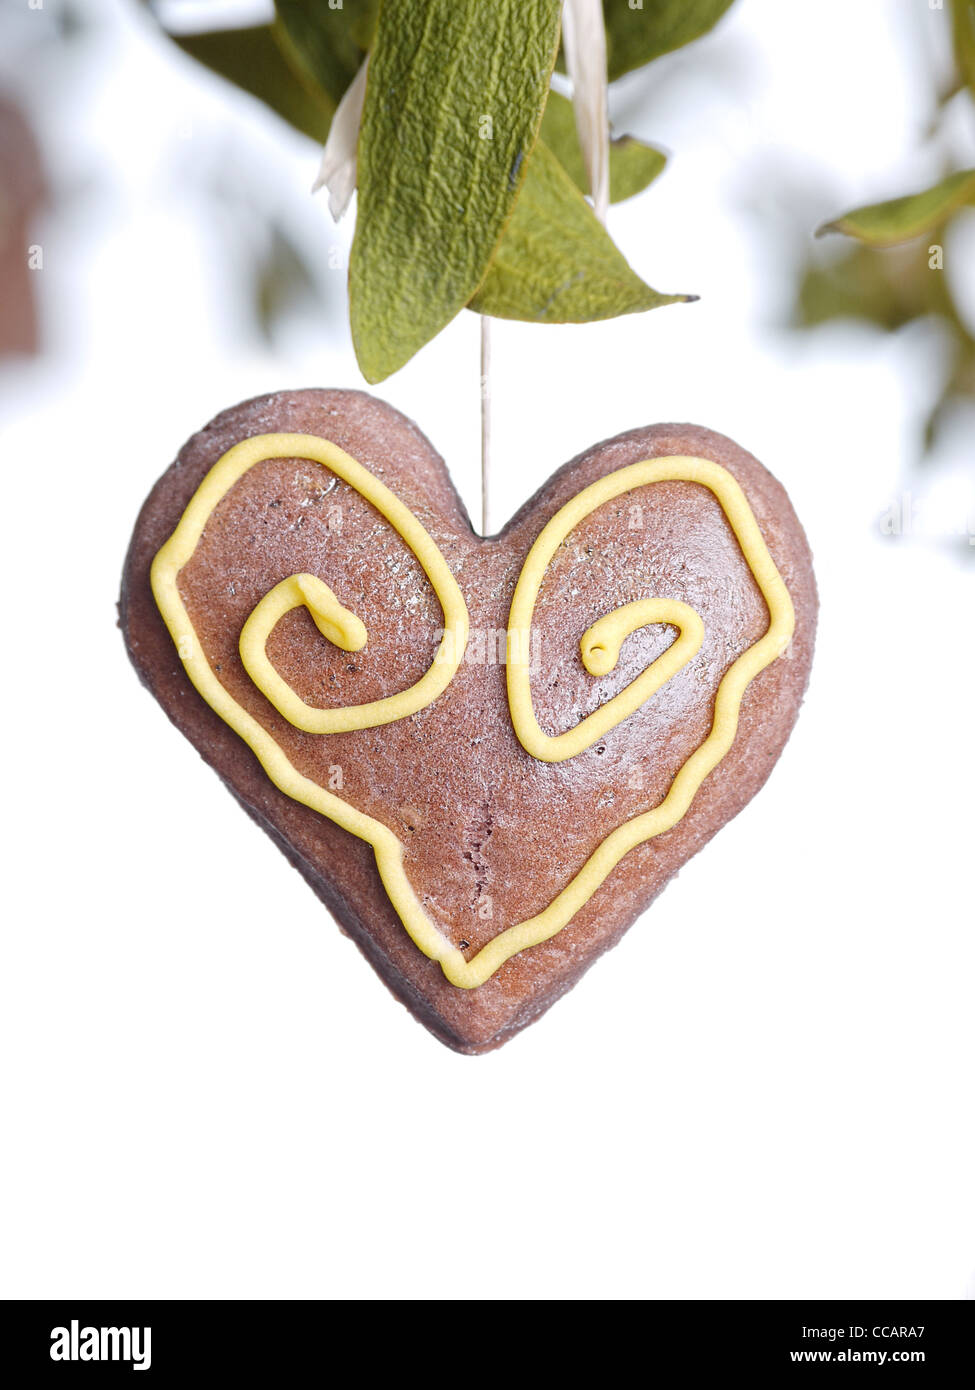 Mistletoe with brown gingerbread heart cake on white background